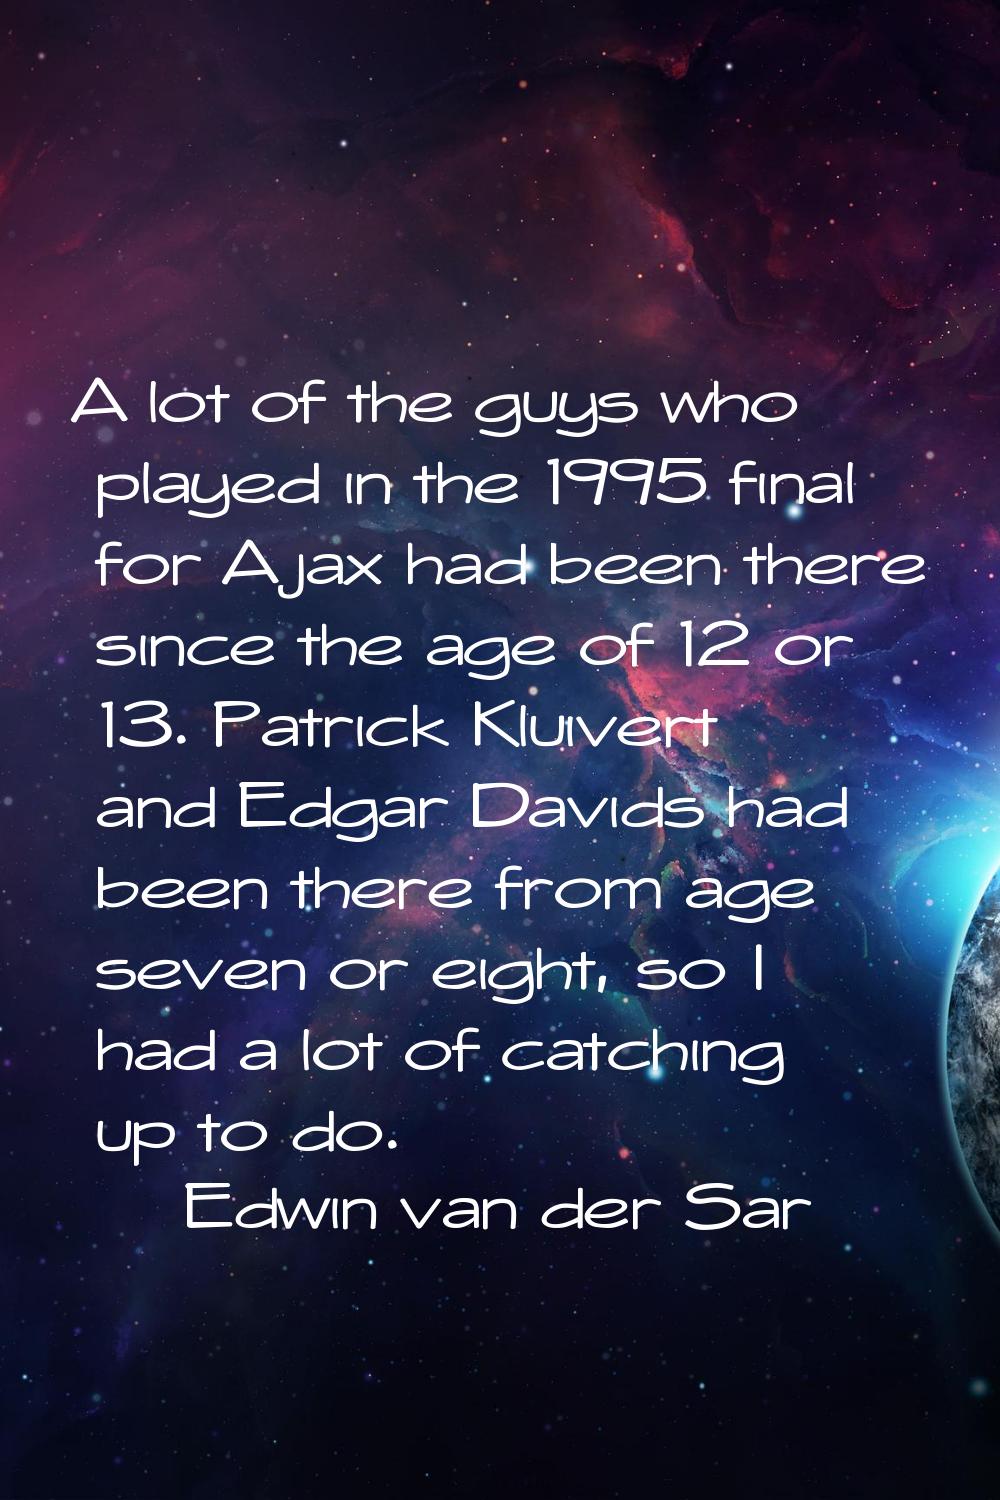 A lot of the guys who played in the 1995 final for Ajax had been there since the age of 12 or 13. P